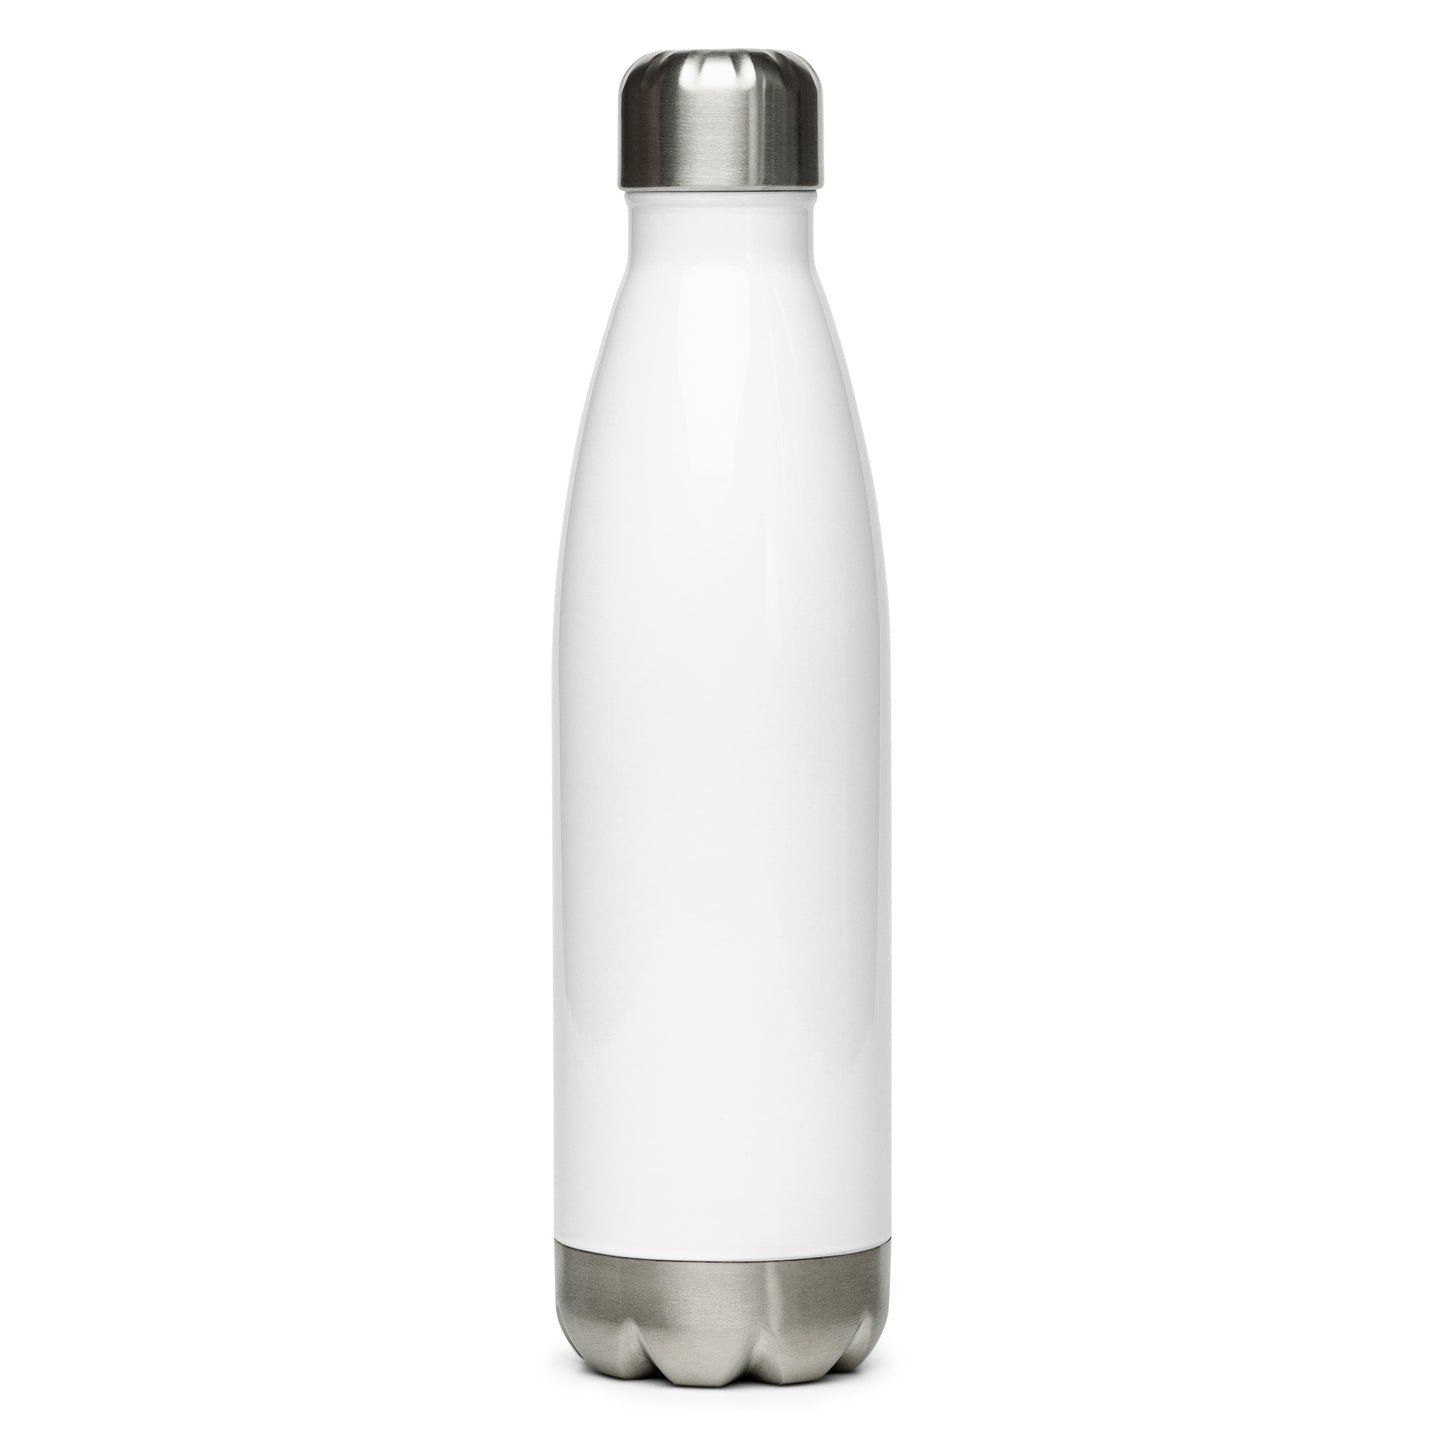 Just a Colorado Girl in an Alabama World Stainless Steel Water Bottle